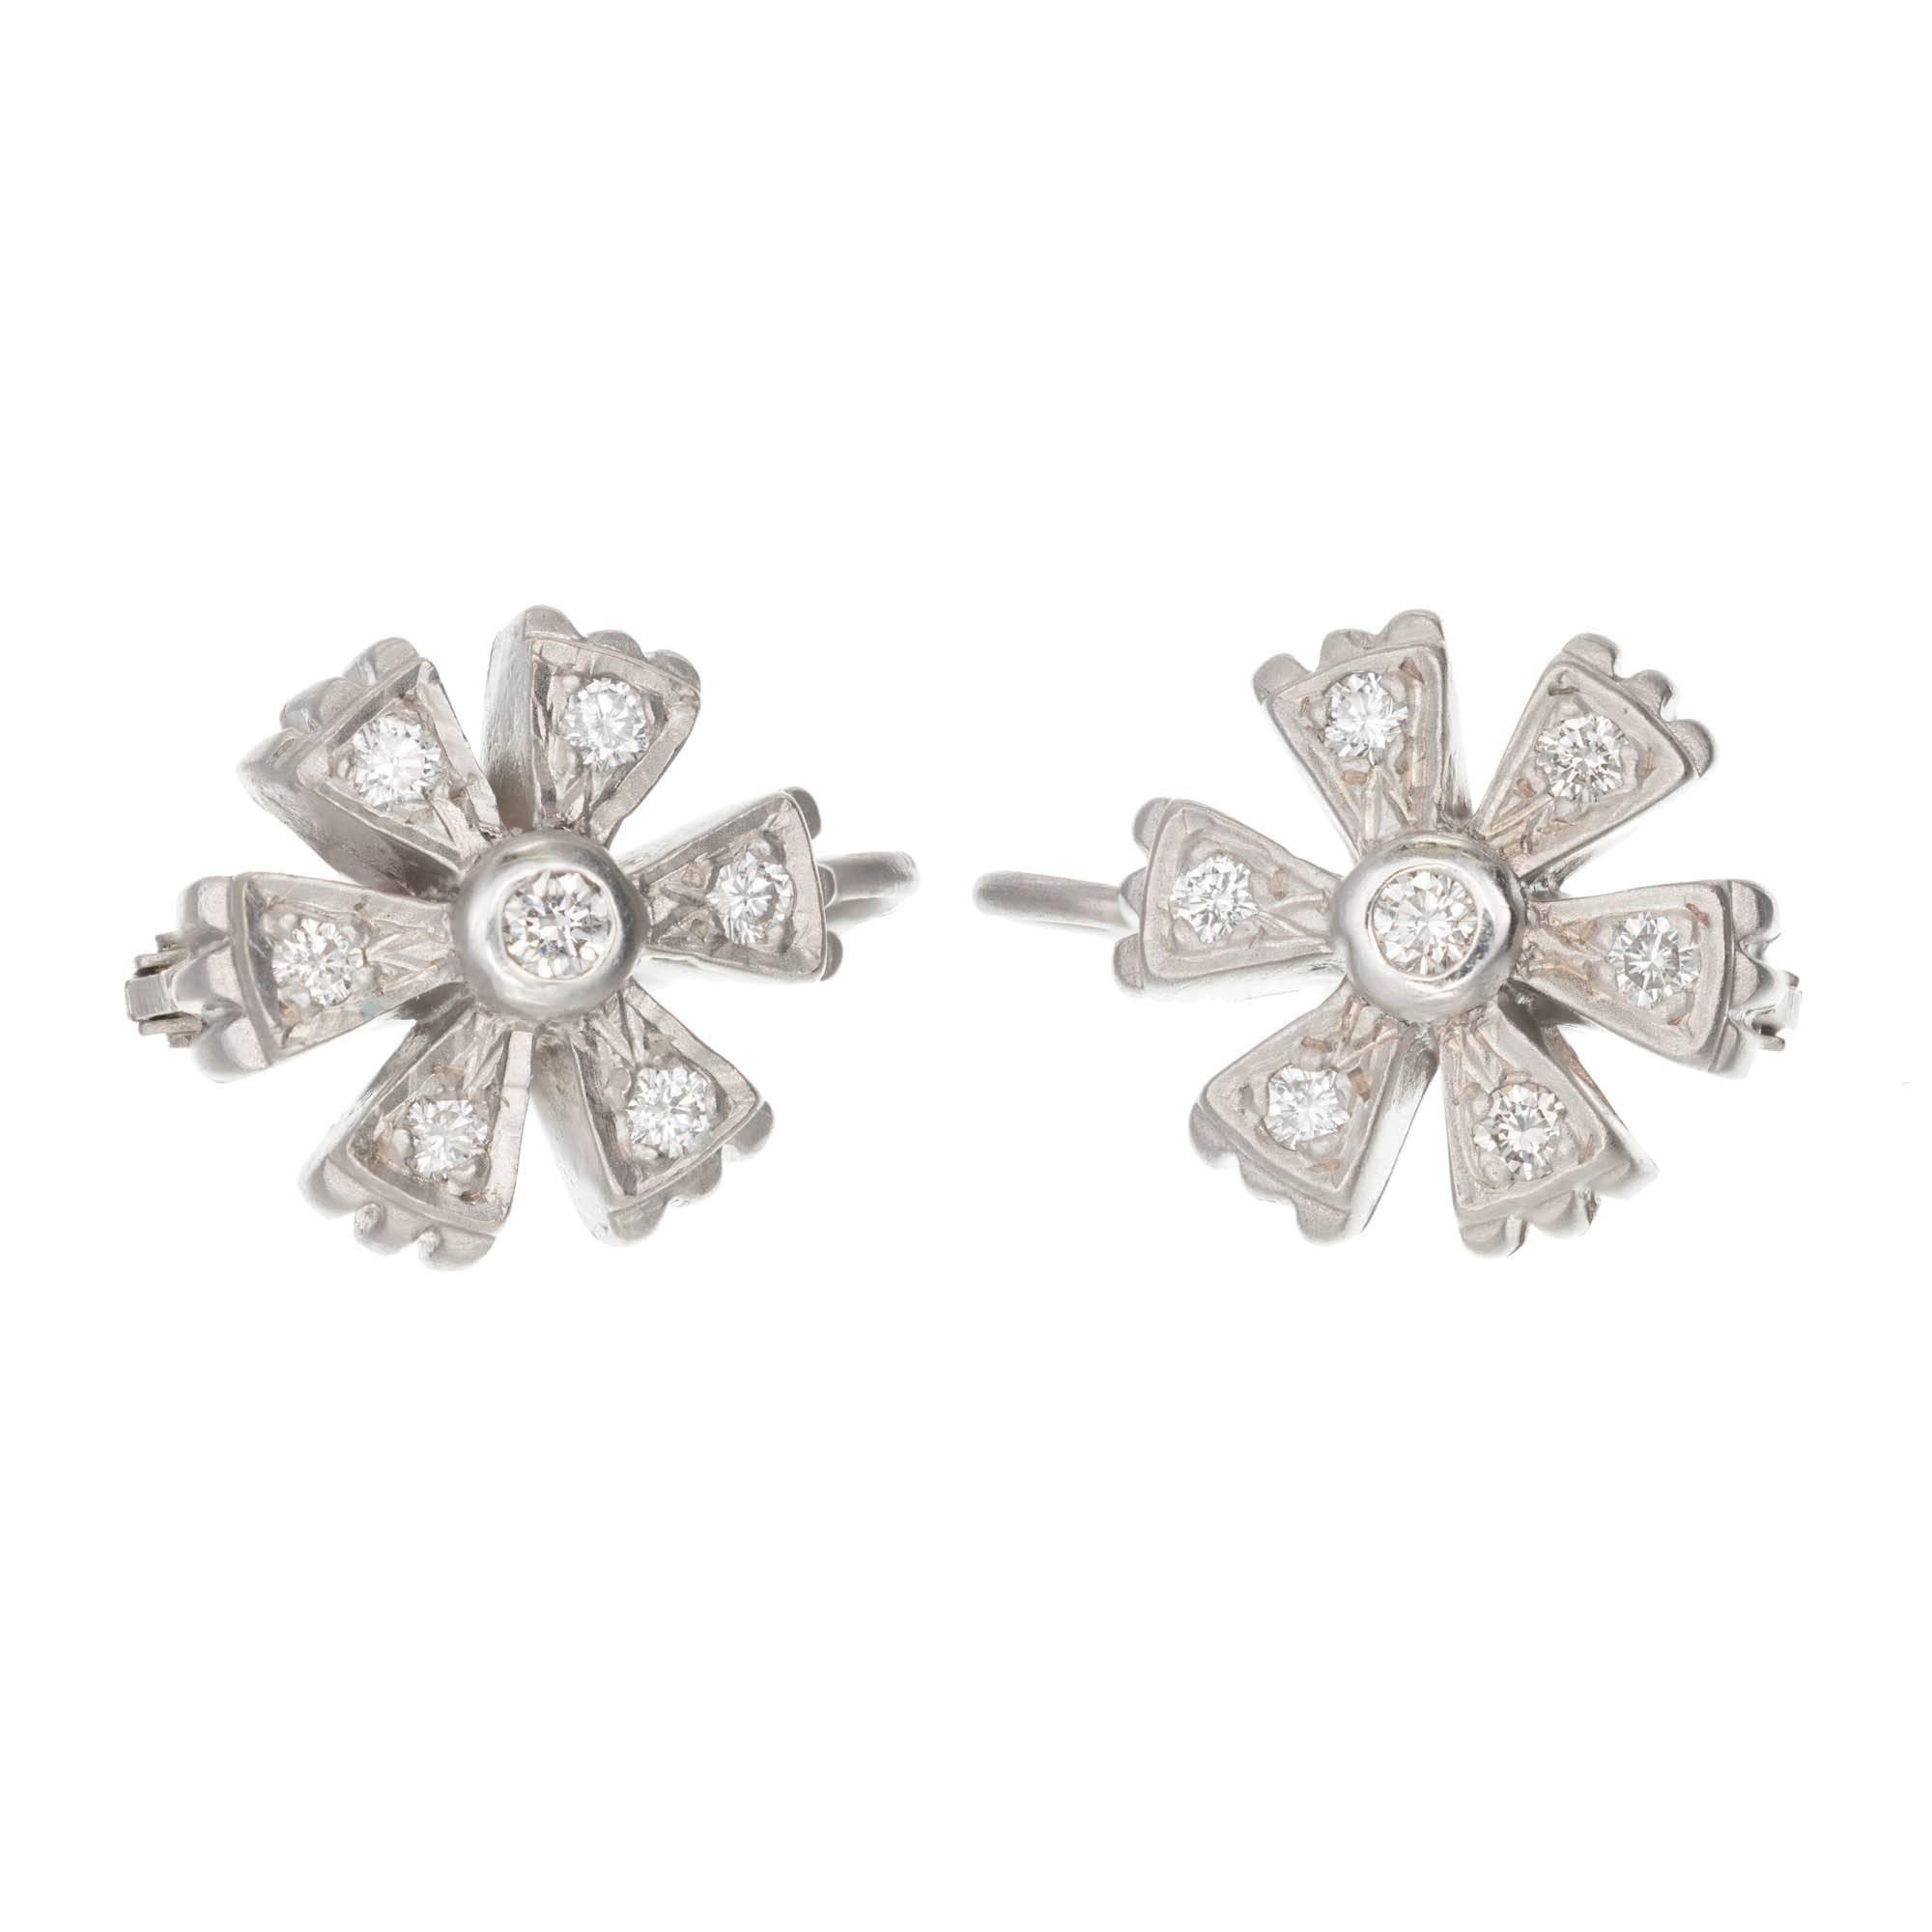 Doris Panos Diamond 18k white gold dull finish dangle flower earrings.

14 round full cut diamonds, approx. total weight .30cts, G, VS
18k White Gold
8.1 grams
Tested and stamped: 18k
Hallmark: DP 2000
Depth: 5.48mm
Top to bottom: 17.11mm or .67